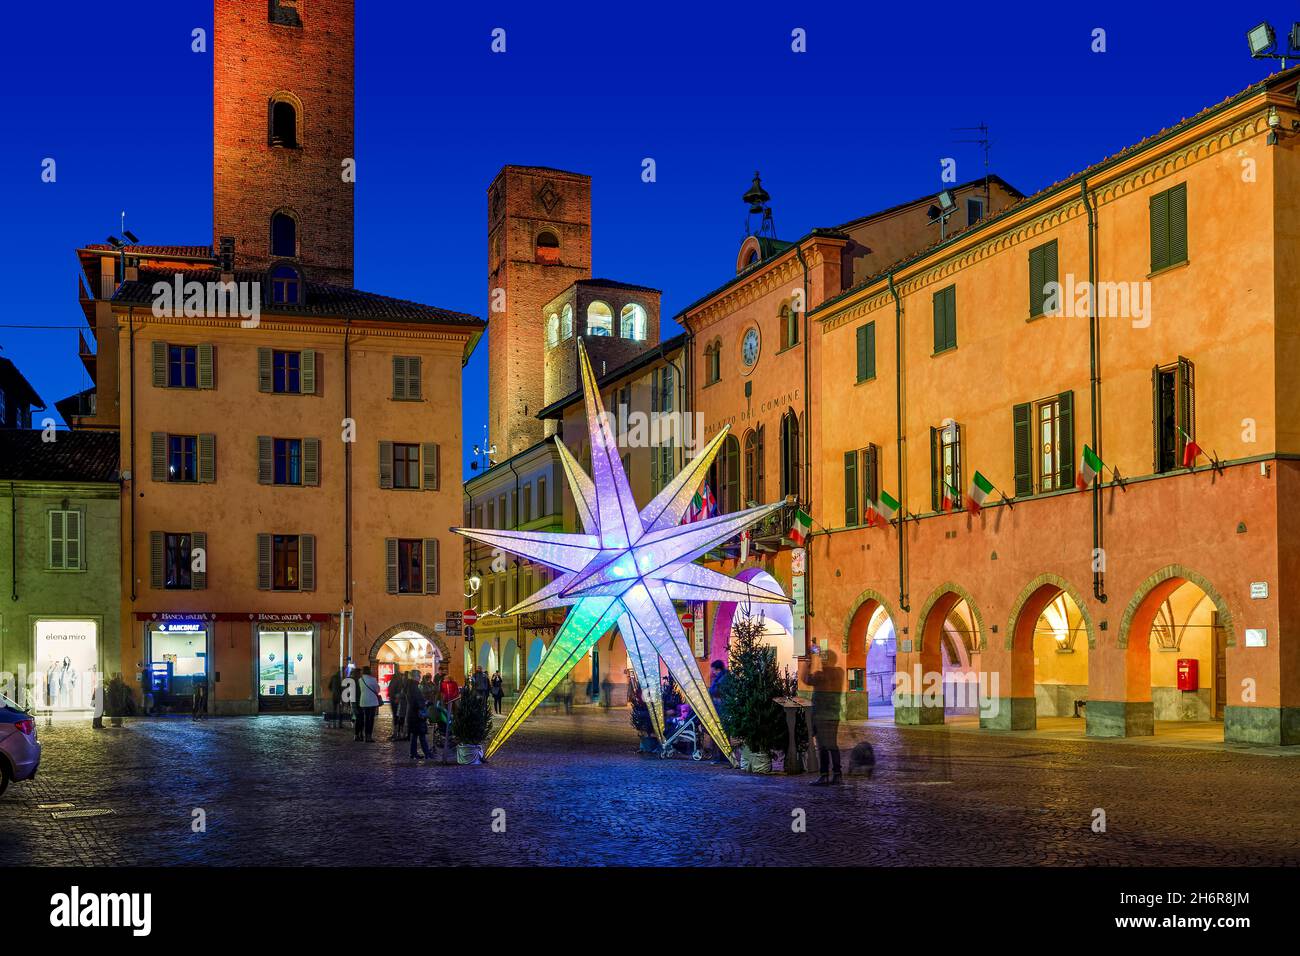 Illuminated installation in the shape of star on central square among historic buildings and medieval towers in Alba, Italy. Stock Photo